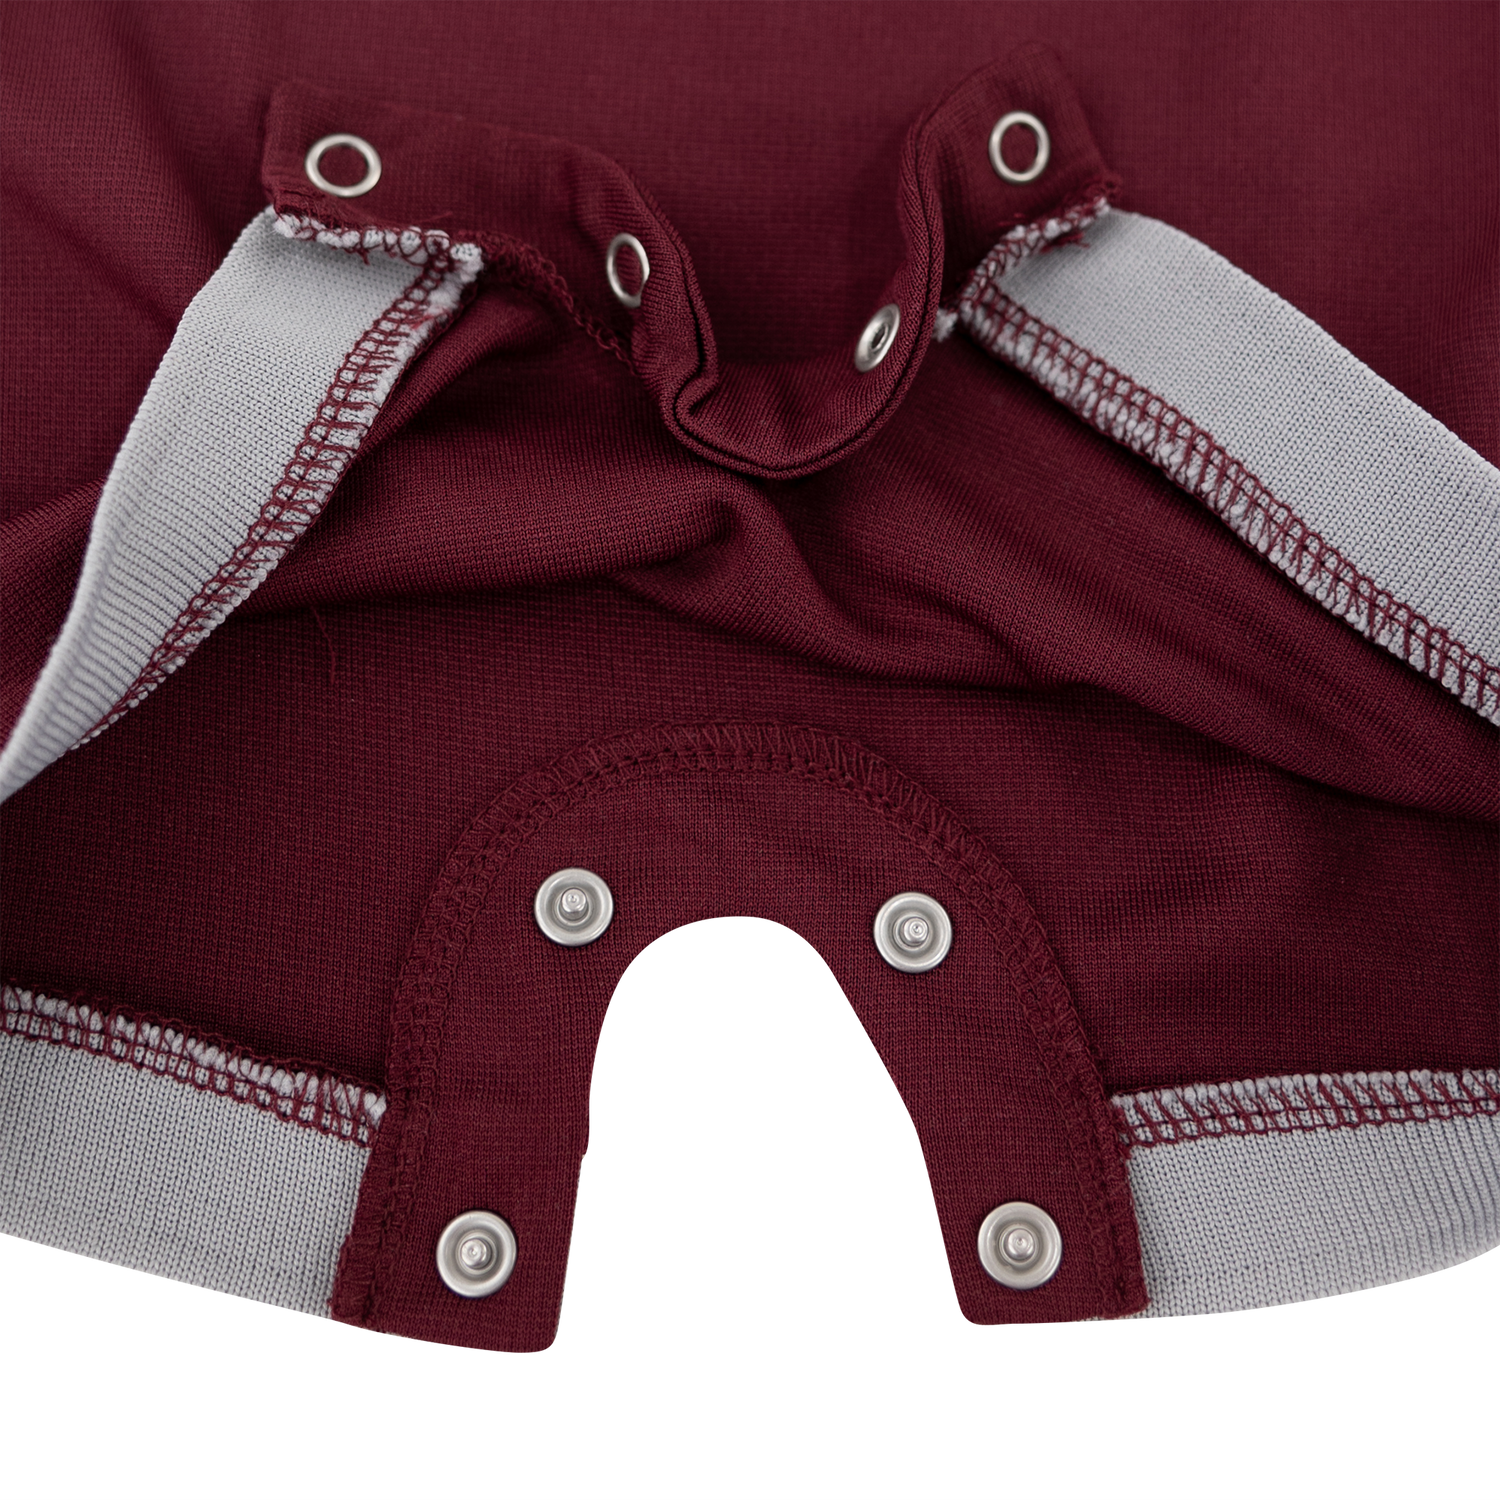 Texas A&M Infant Battle Of the Bands Romper